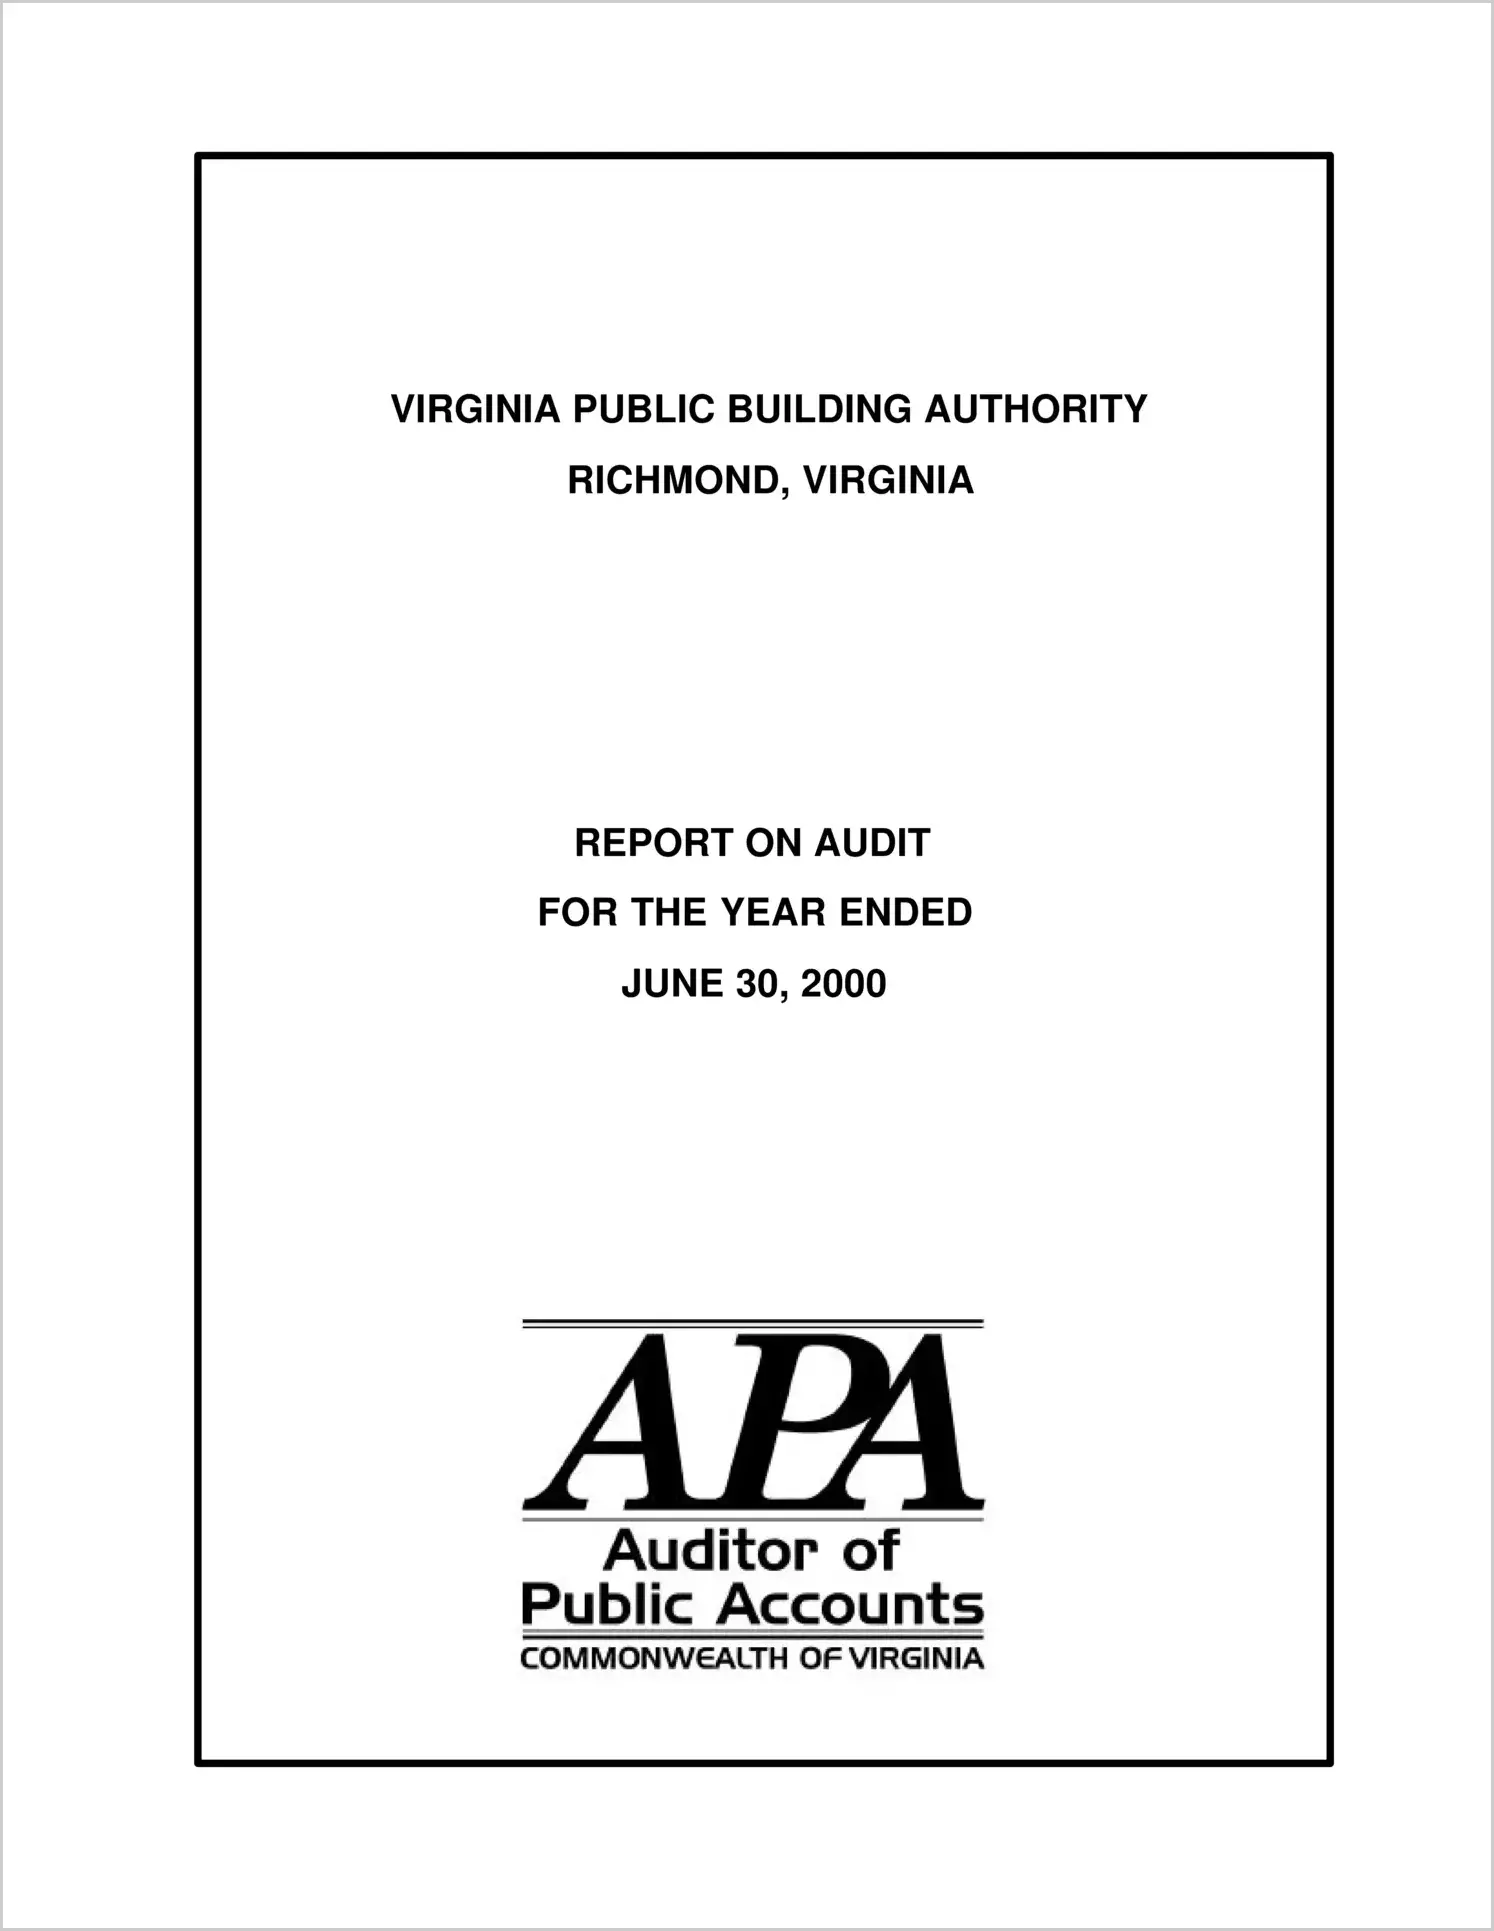 Virginia Public Building Authority for the year ended June 30, 2000